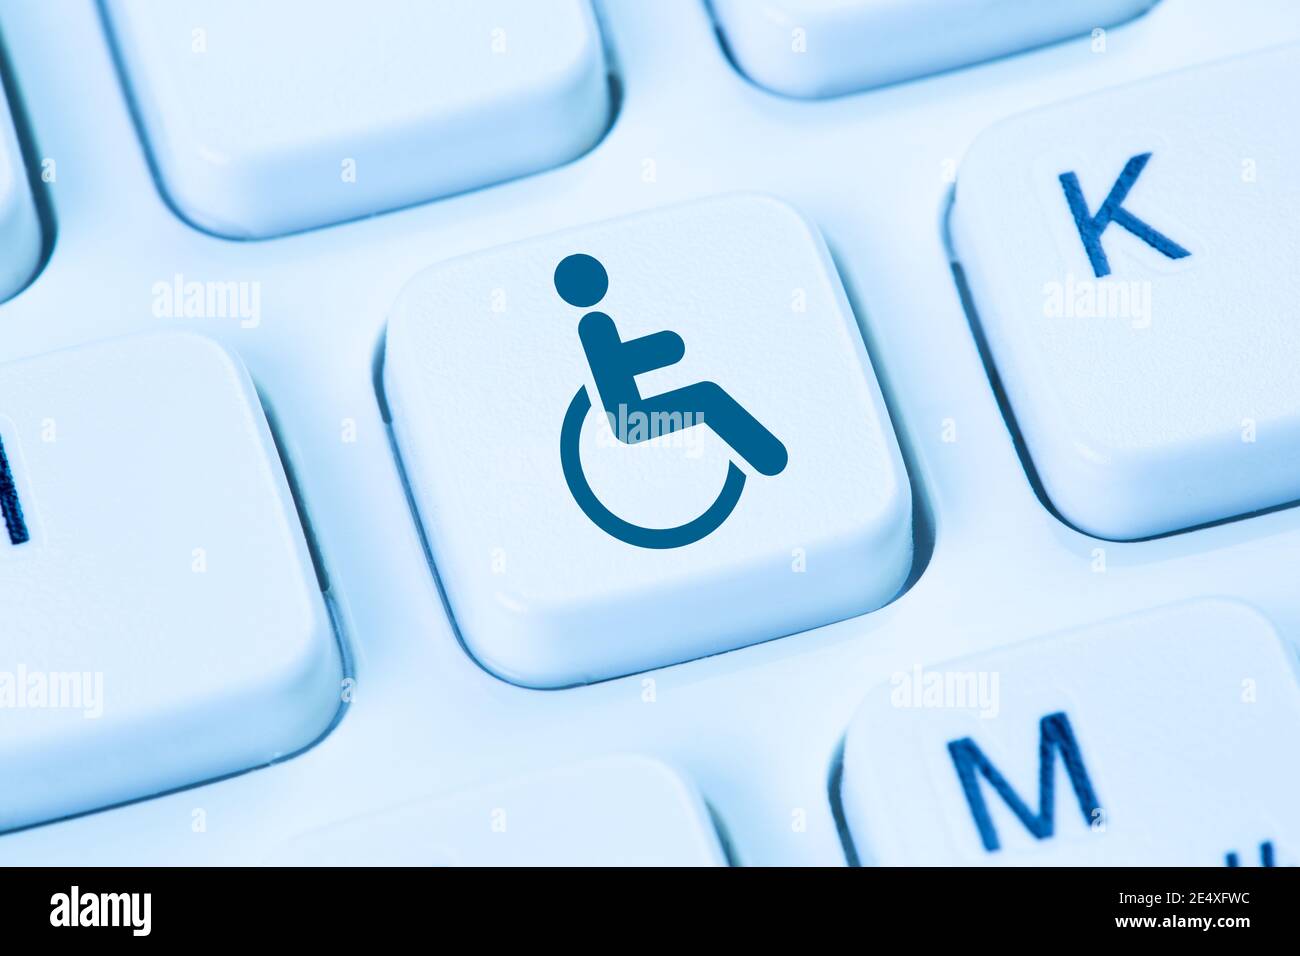 Internet web accessibility online website computer people with disabilities handicap keyboard Stock Photo